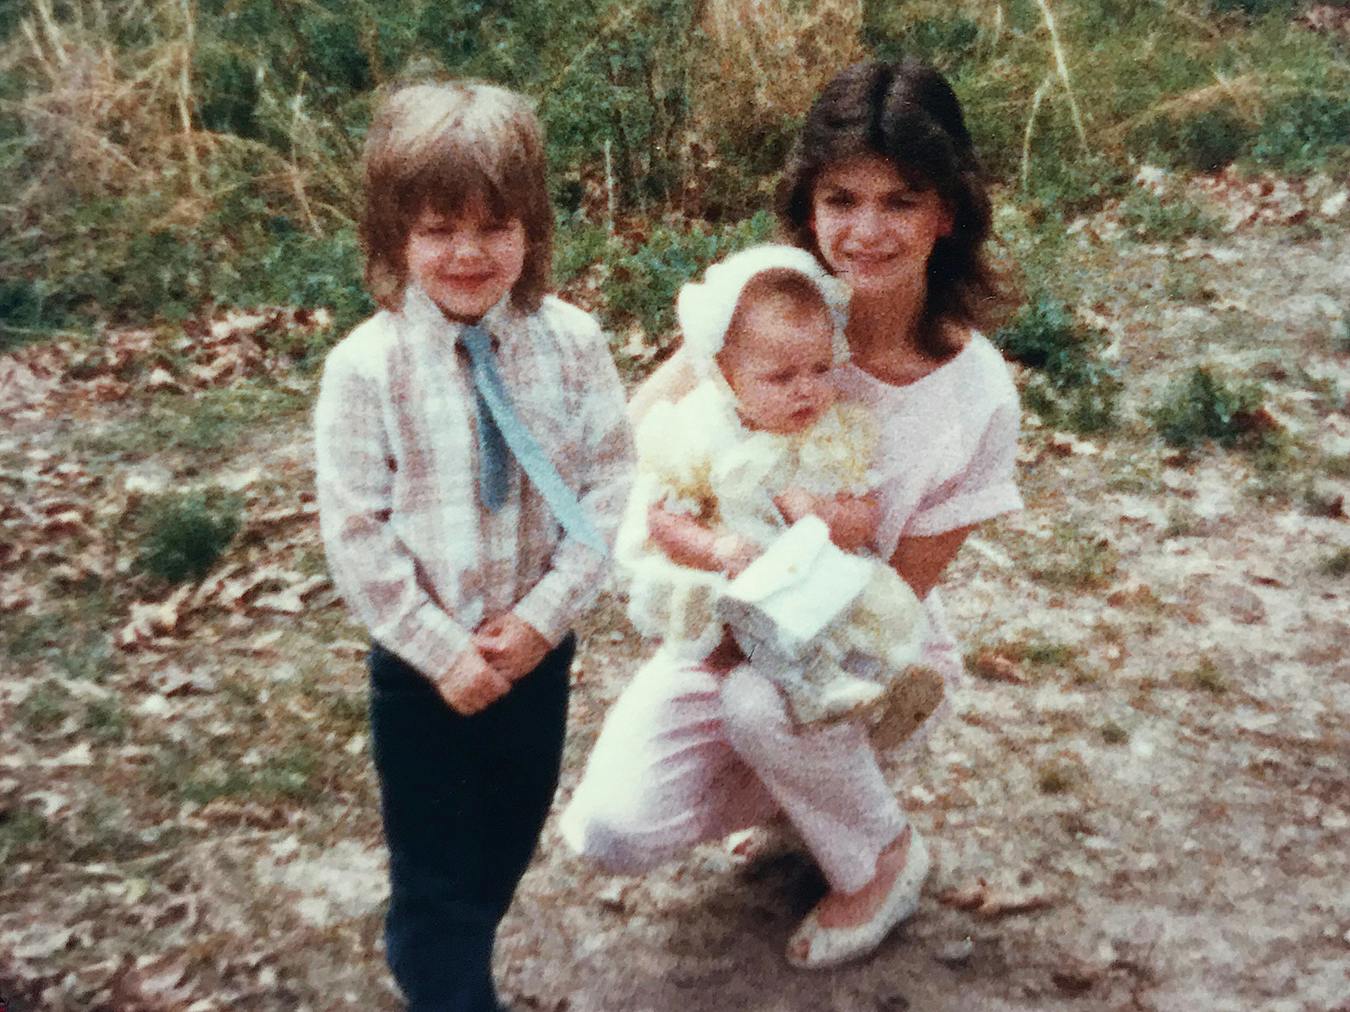 Bobby Bones as a chile with his sister and mother in their Sunday best.  